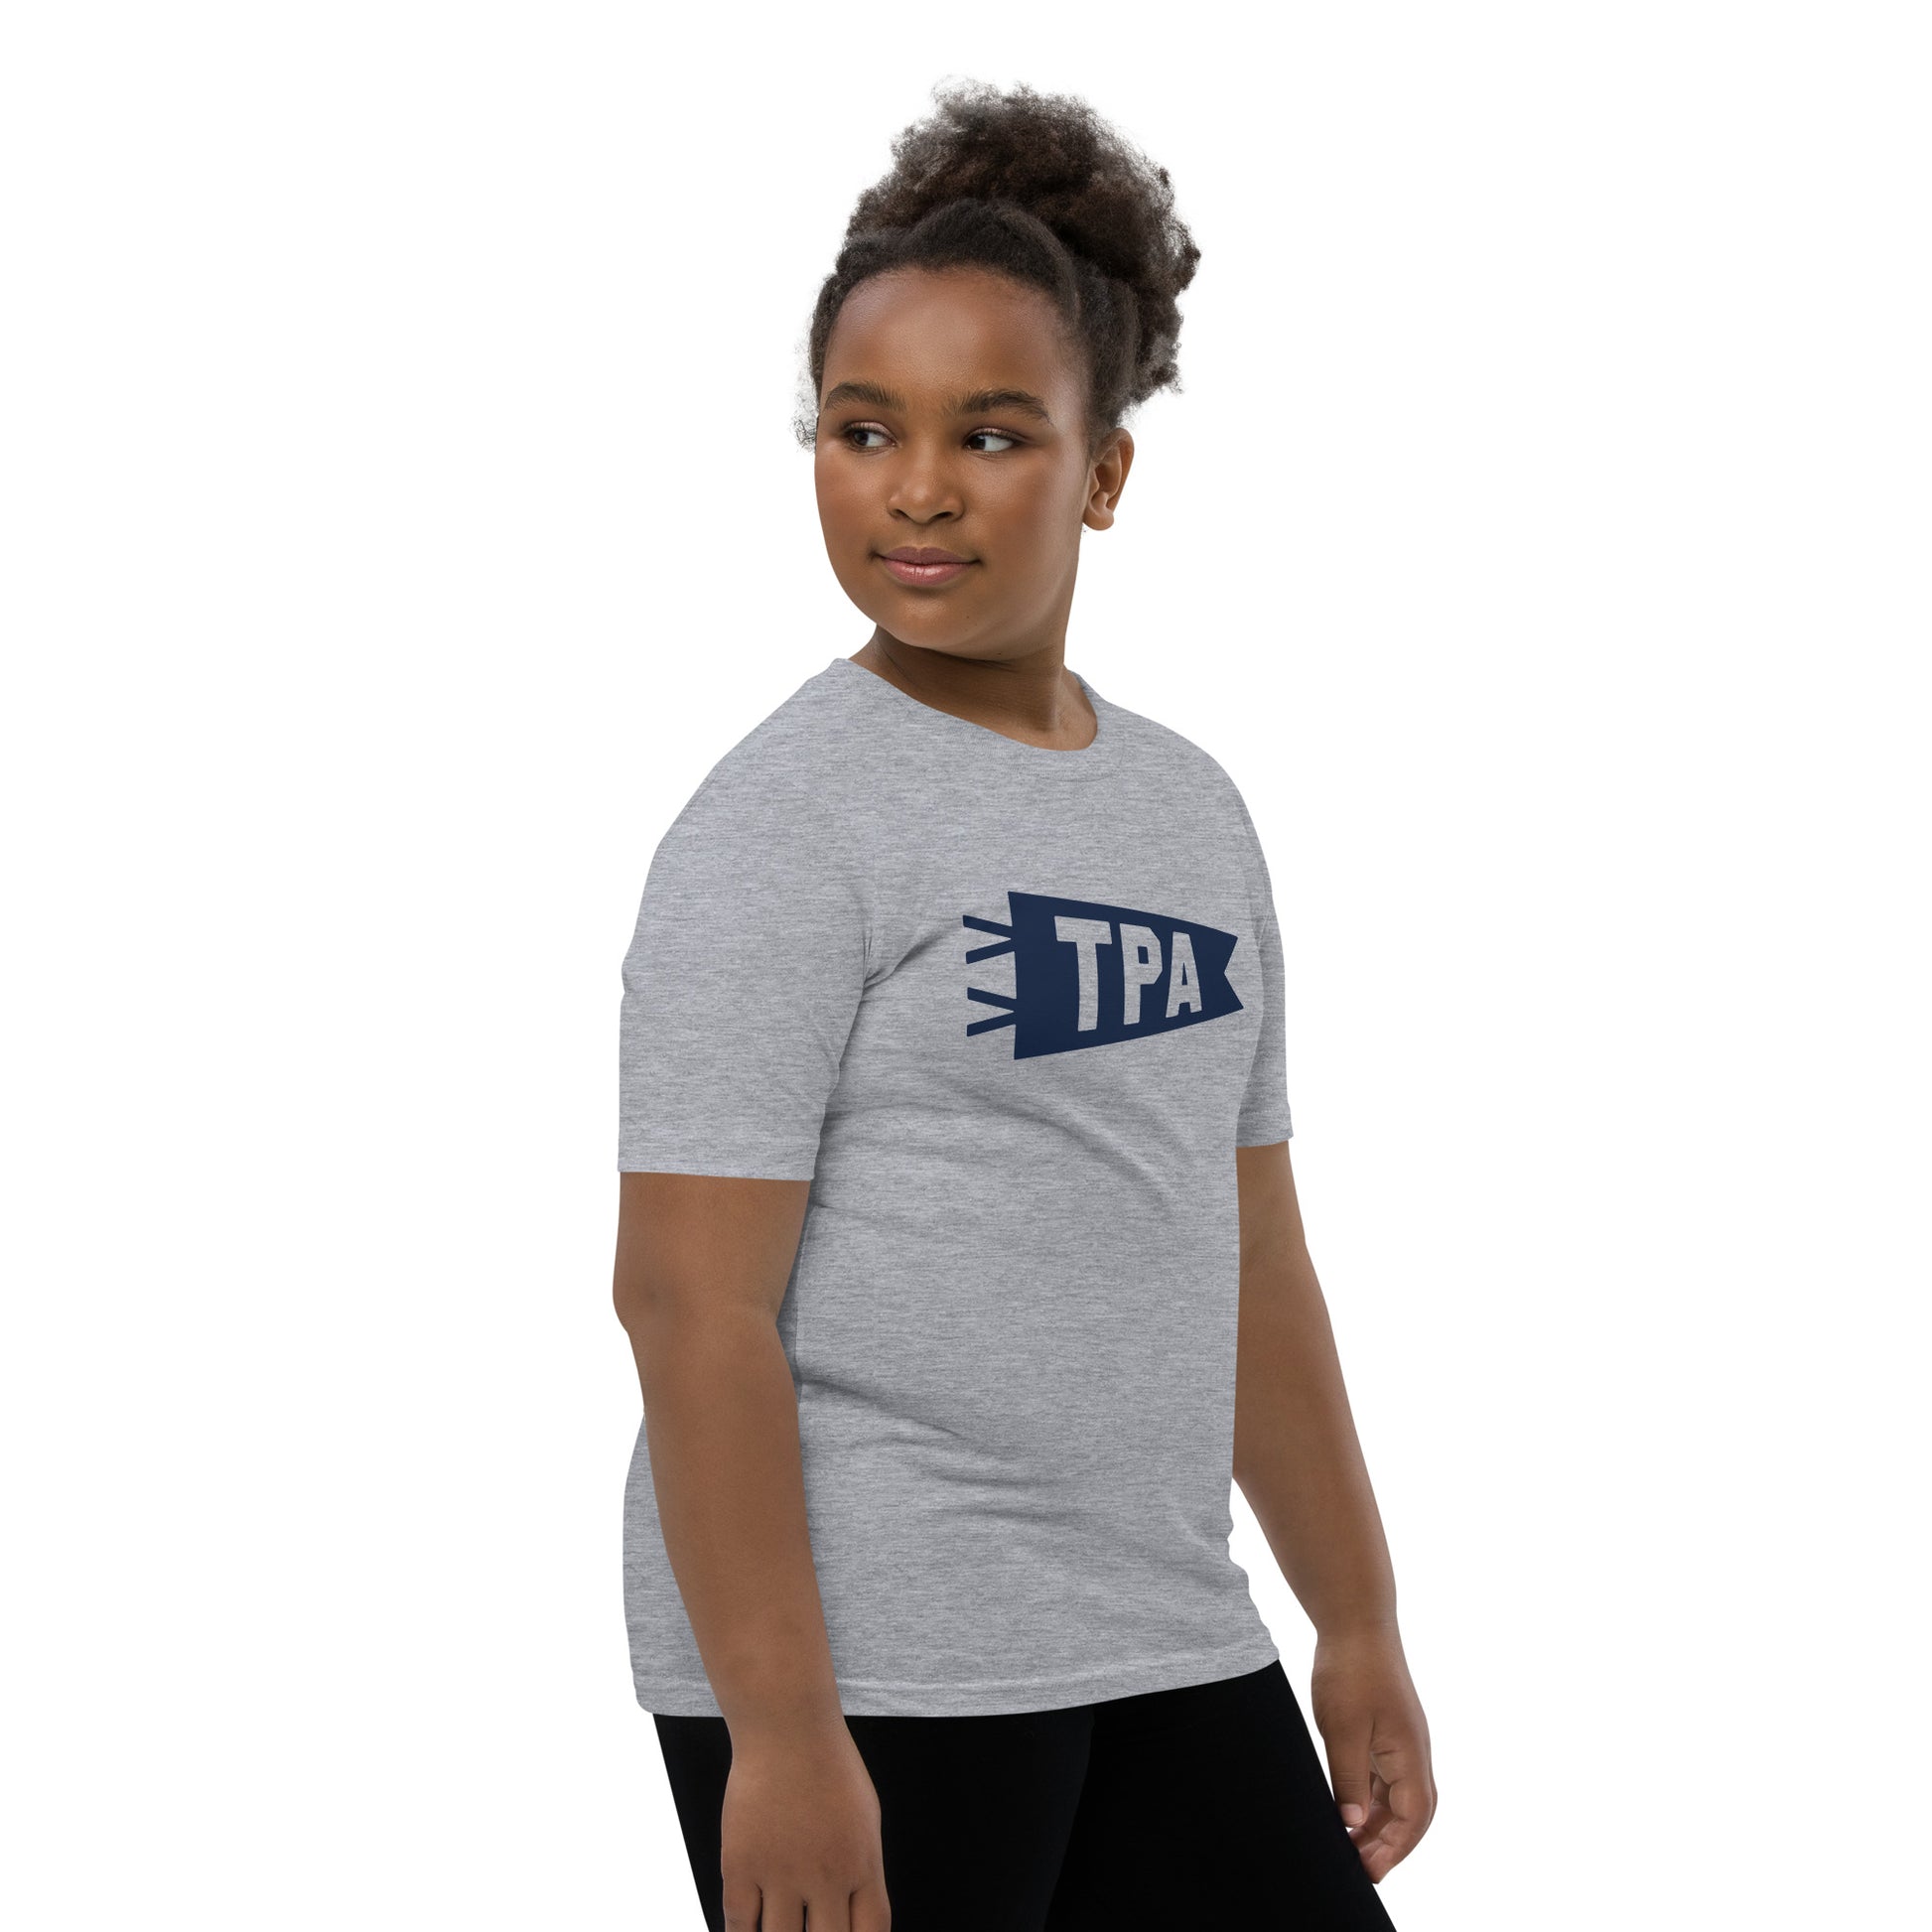 Kid's Airport Code Tee - Navy Blue Graphic • TPA Tampa • YHM Designs - Image 03